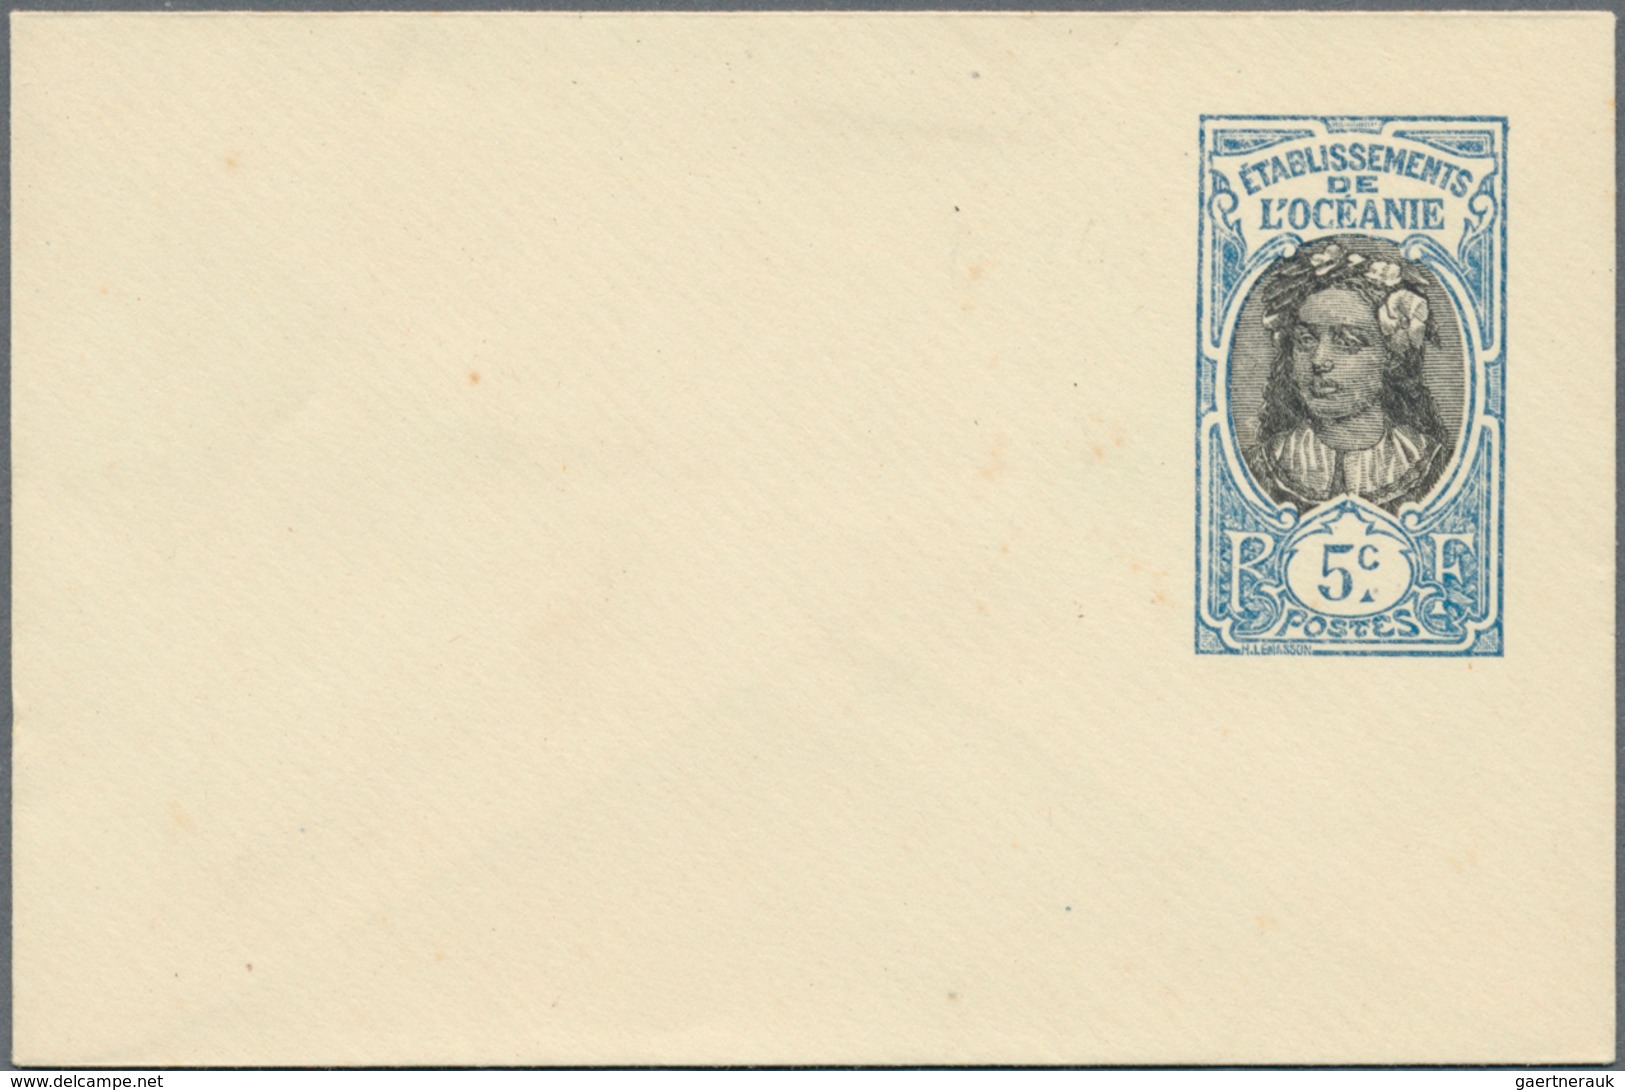 Französisch-Ozeanien: 1913/1954, mainly mint collection on stockcards and also a nice range of 16 co